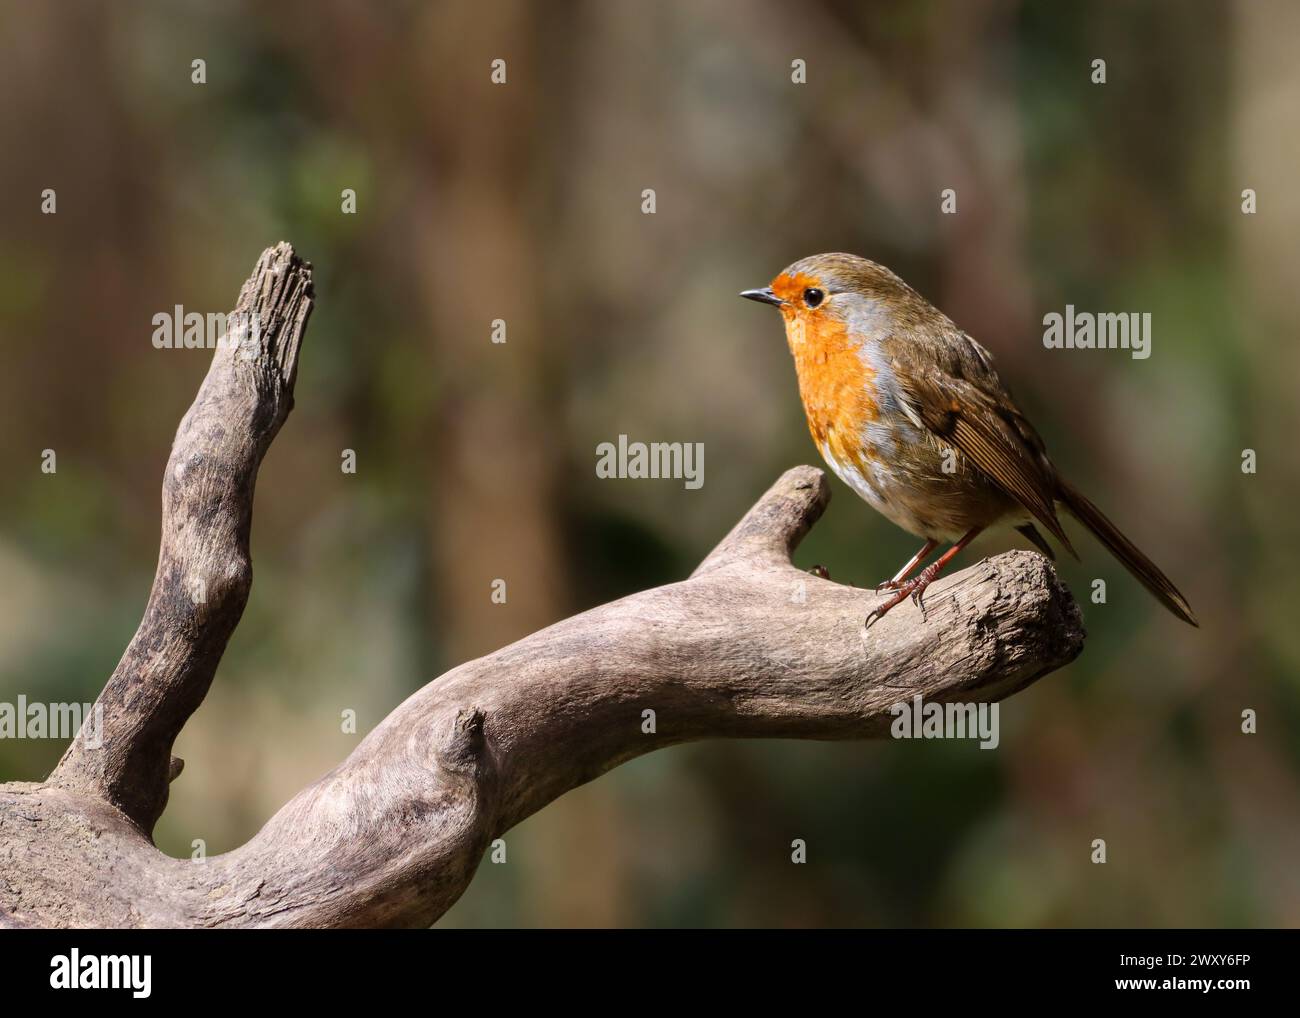 A selective focus shot of a robin bird perched on a tree branch Stock Photo